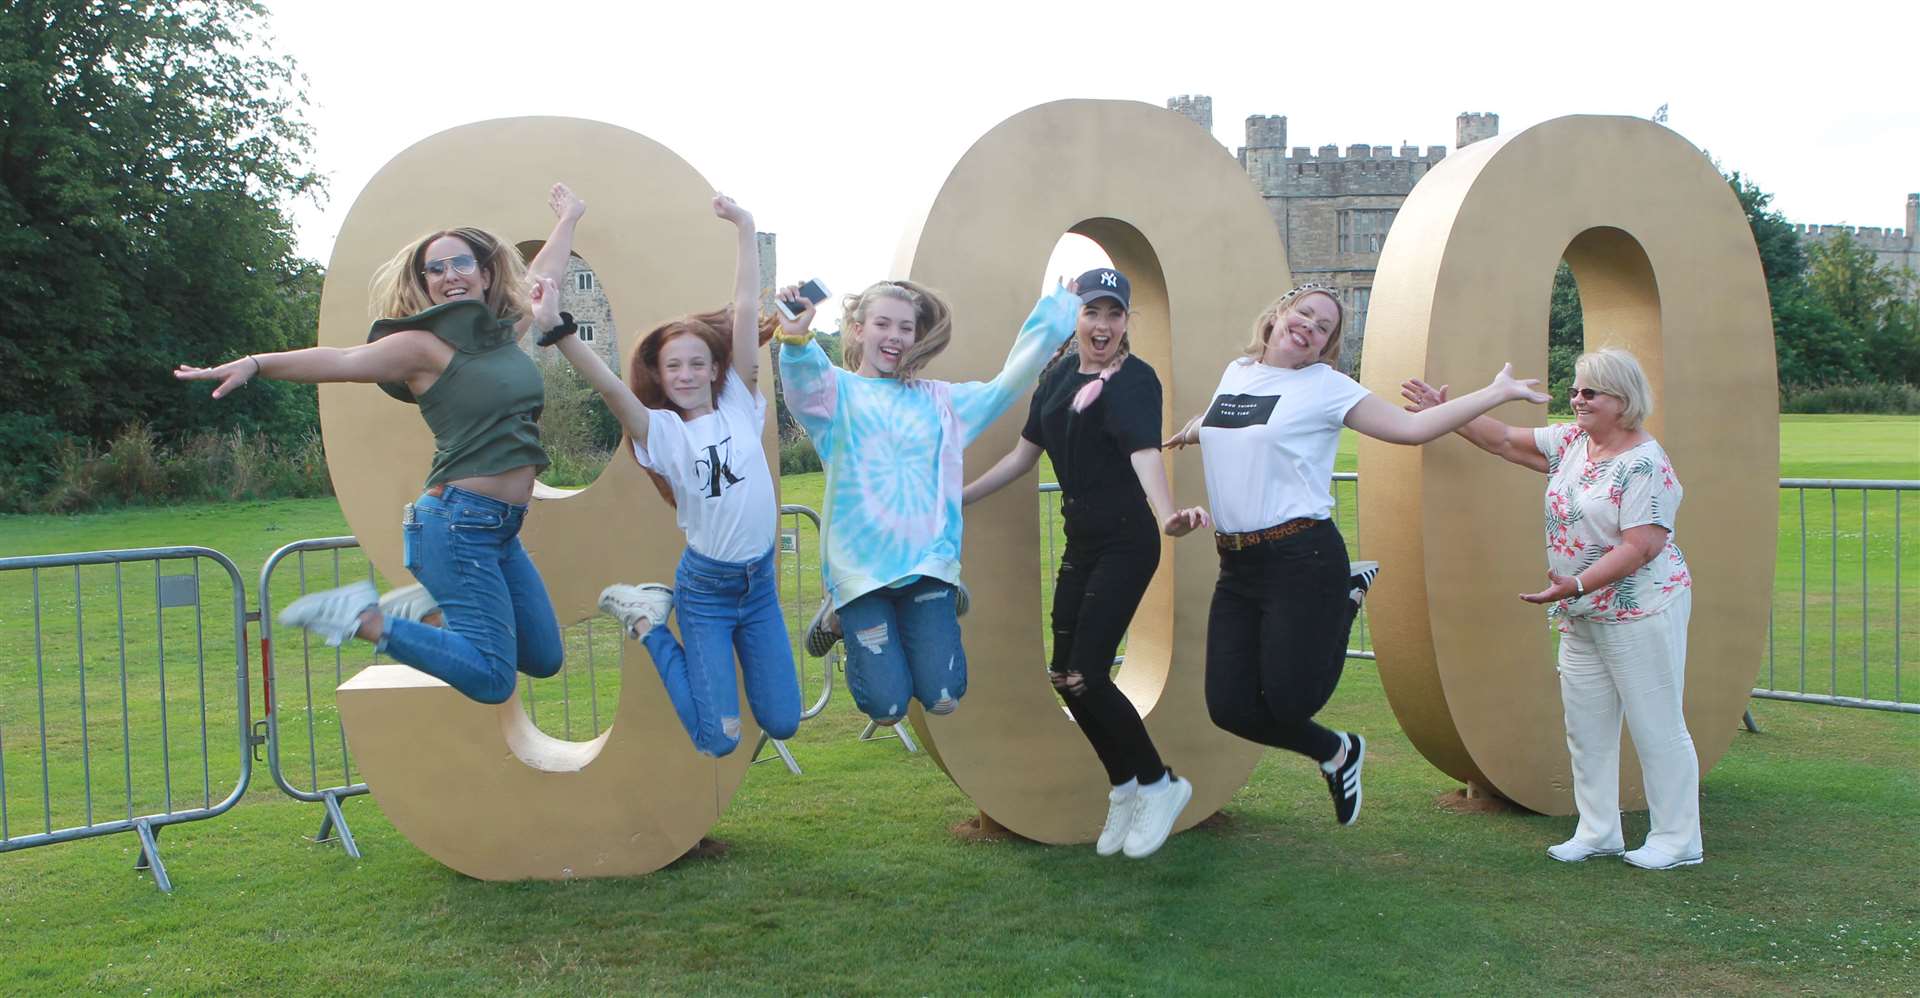 900th birthday celebrations at the Leeds Castle Classical Concert Picture: John Westhrop